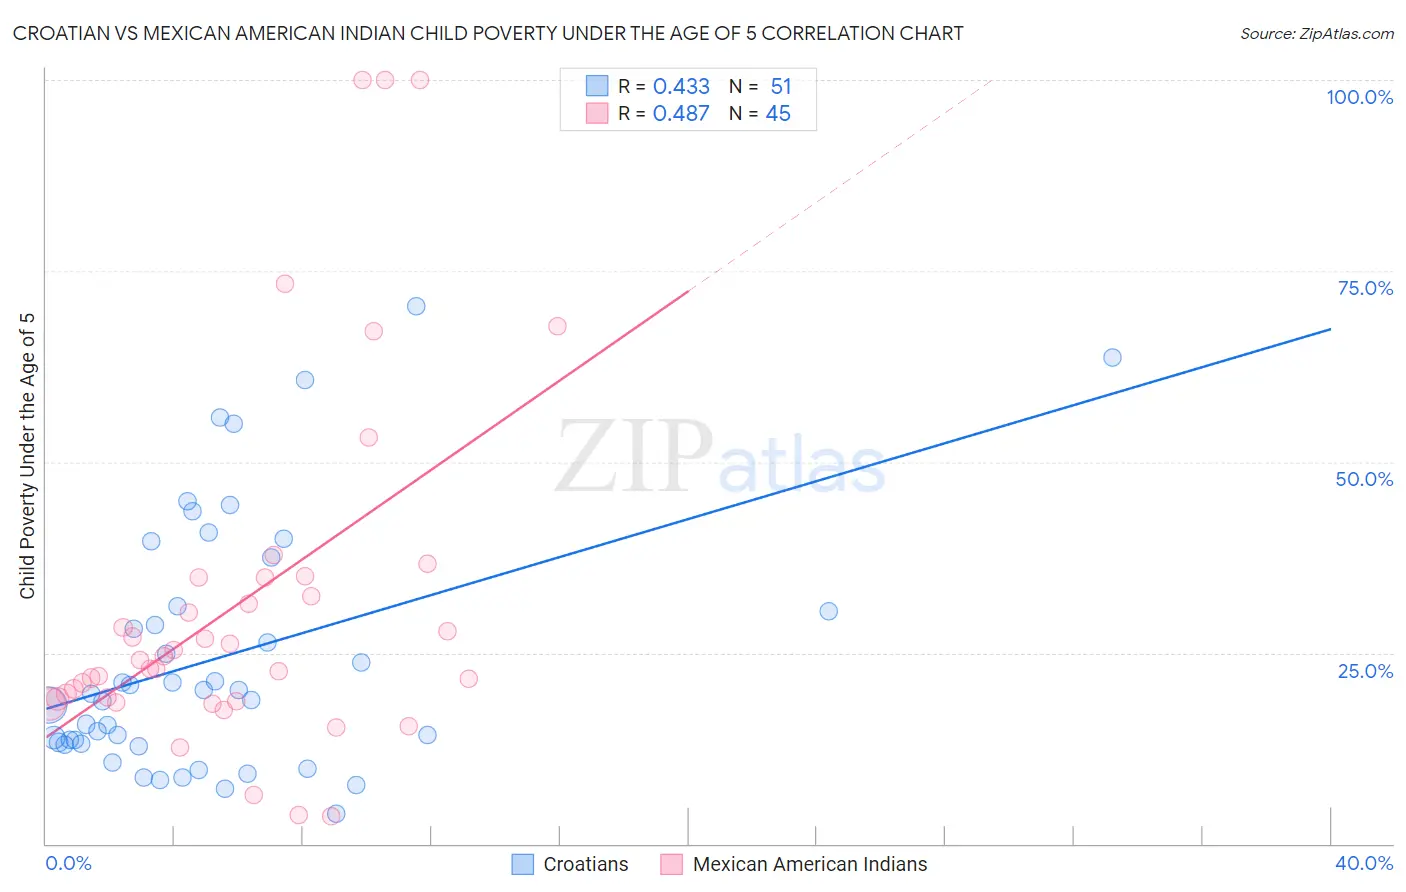 Croatian vs Mexican American Indian Child Poverty Under the Age of 5